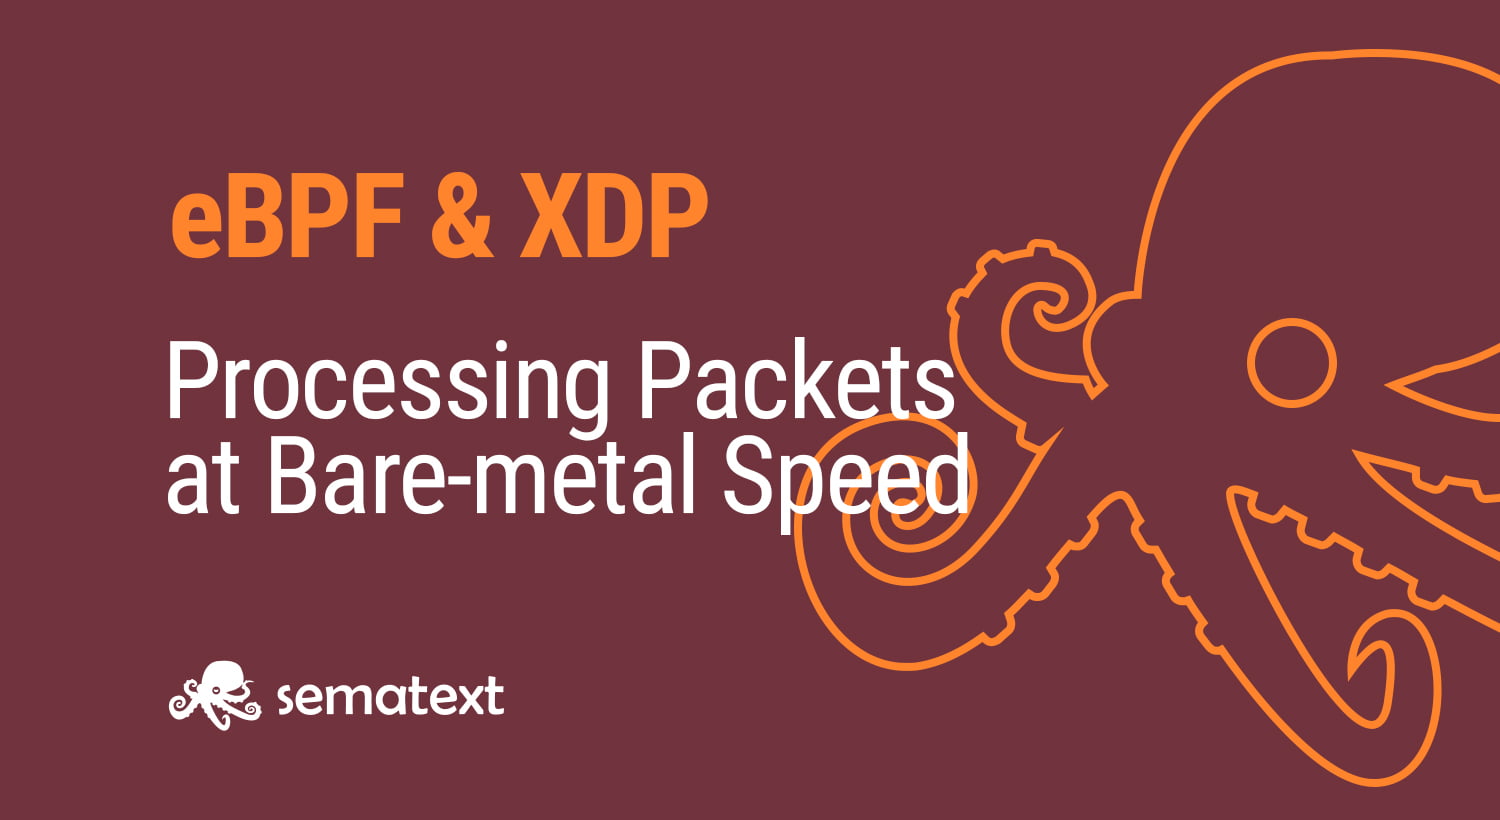 ebpf and XDP for Processing Packets at Bare-metal Speed